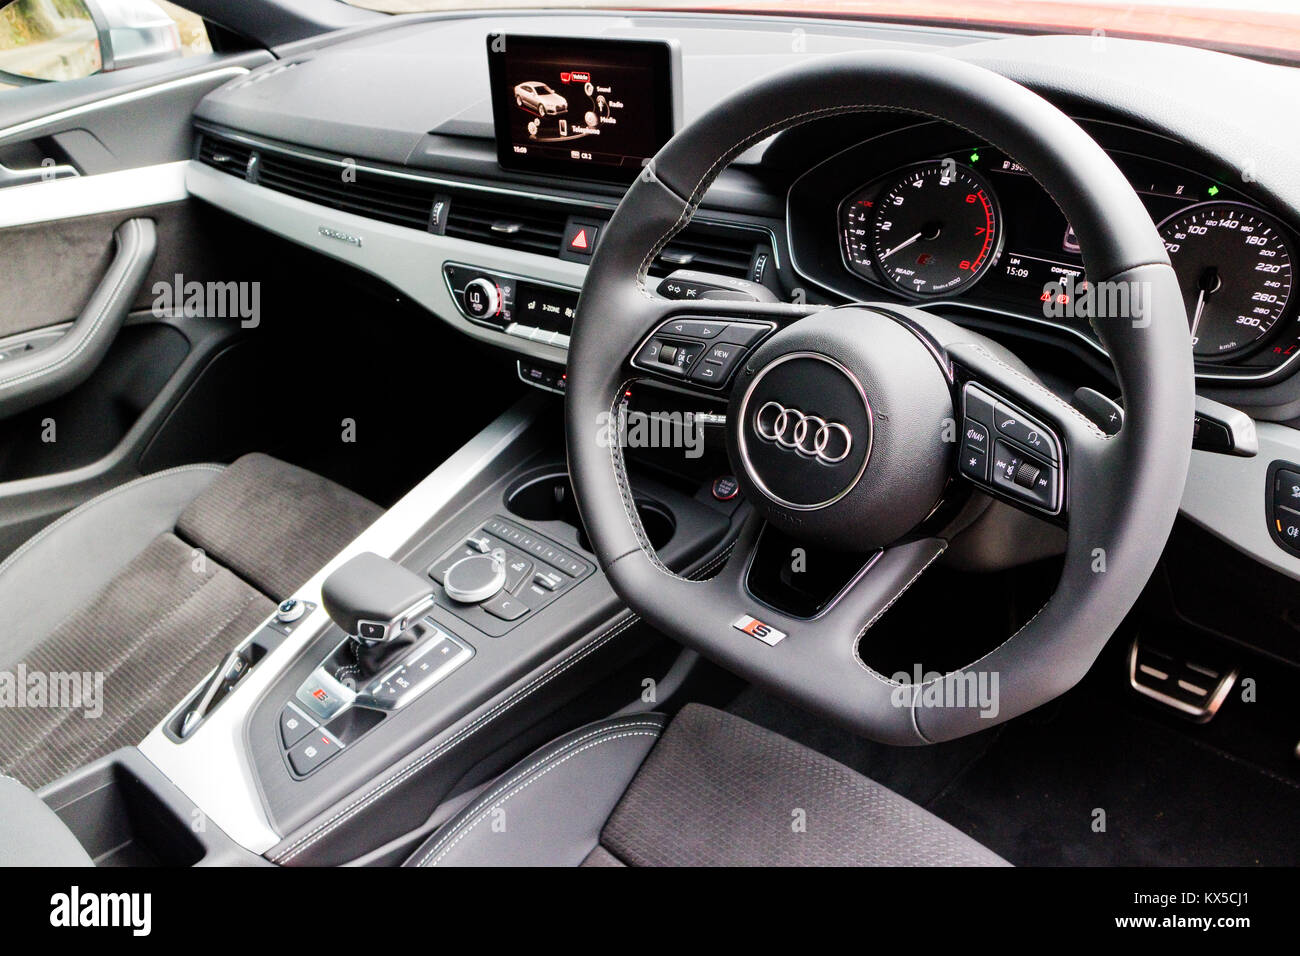 Audi S5 Interior High Resolution Stock Photography and Images - Alamy